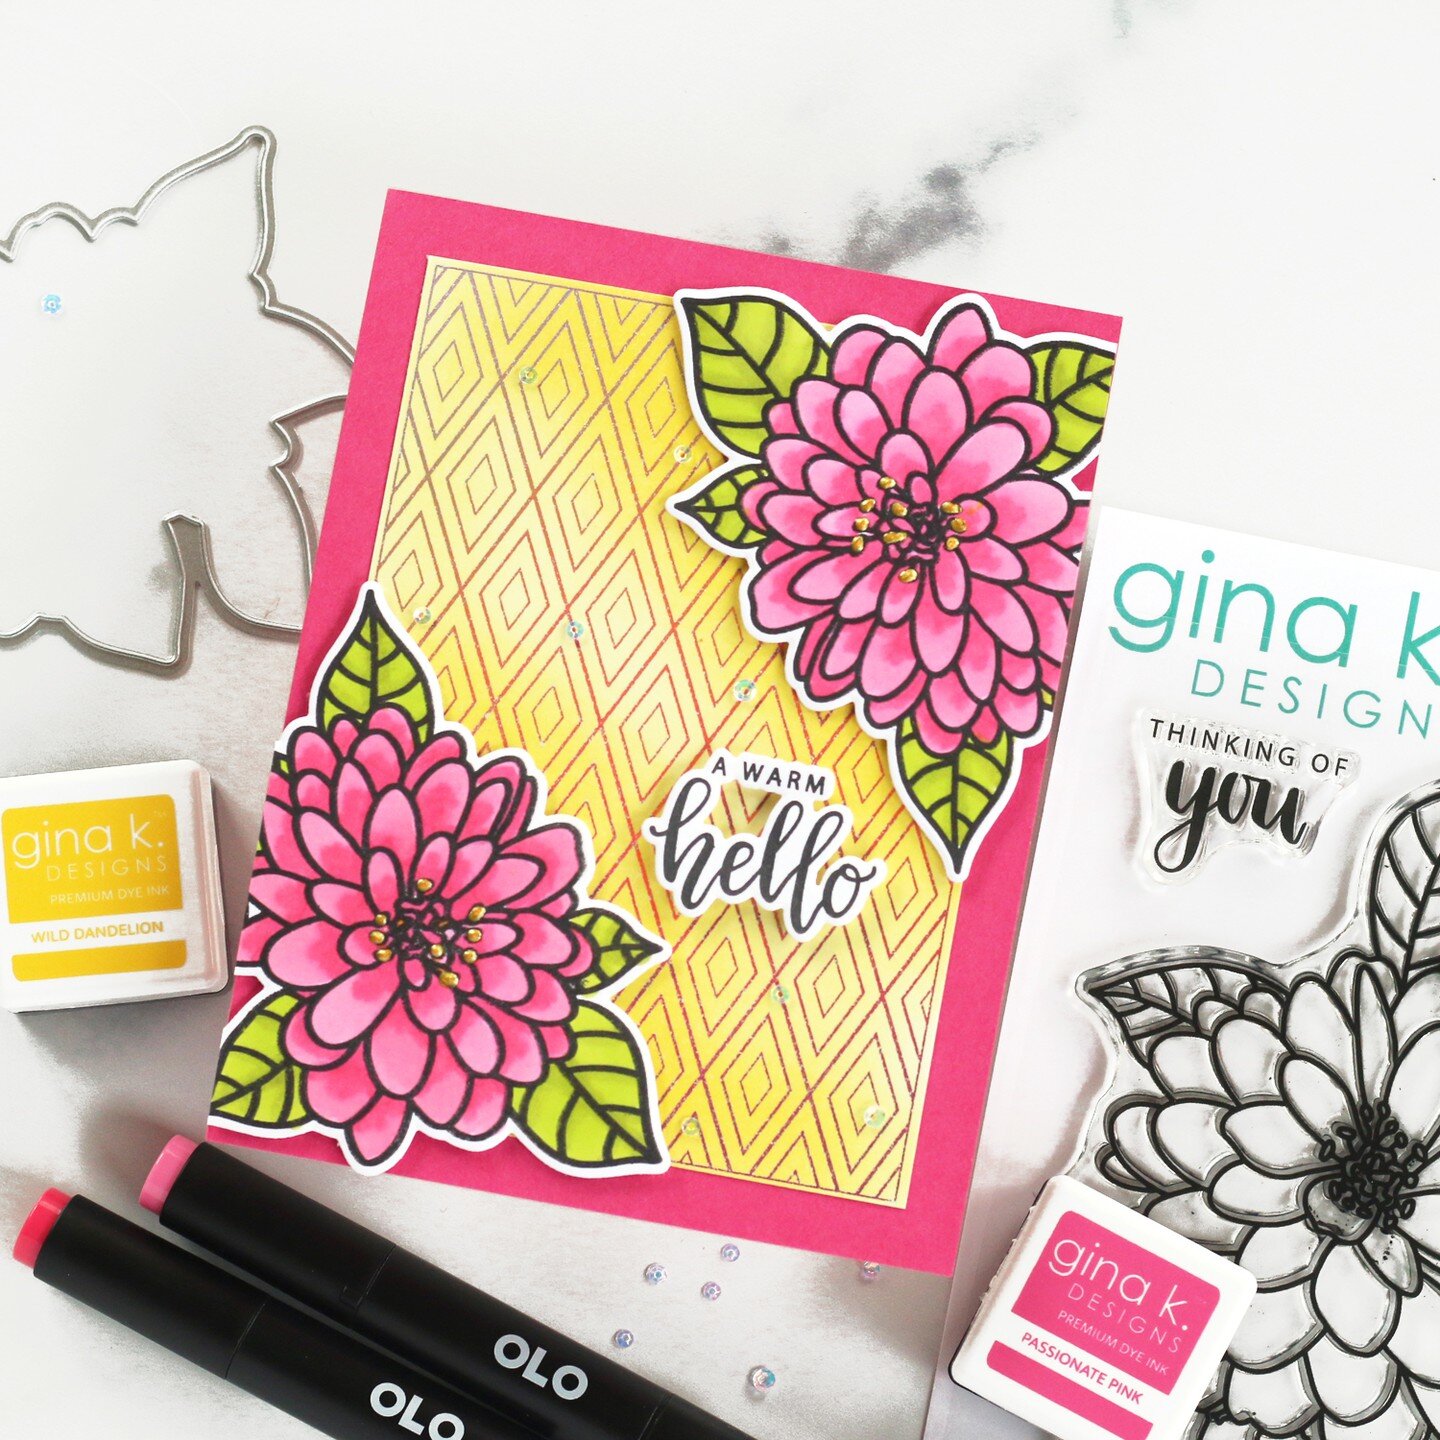 The new release from @ginakdesigns is here! Watch my latest process video to see this card come together!
.
I loved using products from Gina's gorgeous new release to create this card using four different techniques: alcohol marker coloring with @olo